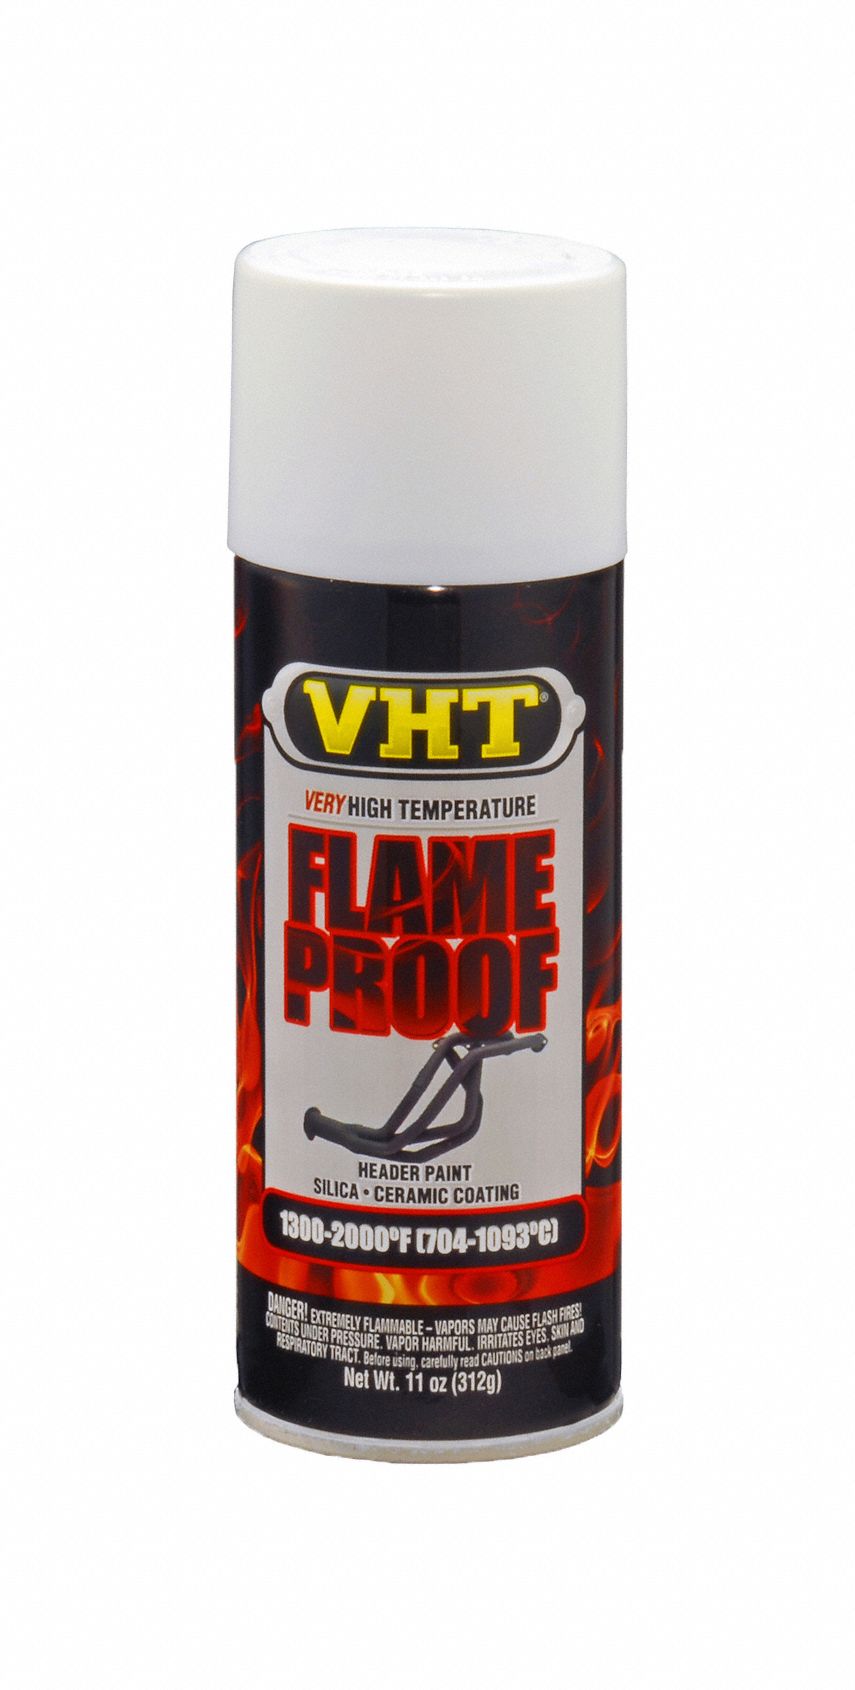 Flameproof Coating: Metal/Steel, Solvent, White, 11 oz Container, Flameproof, Heat Resistant